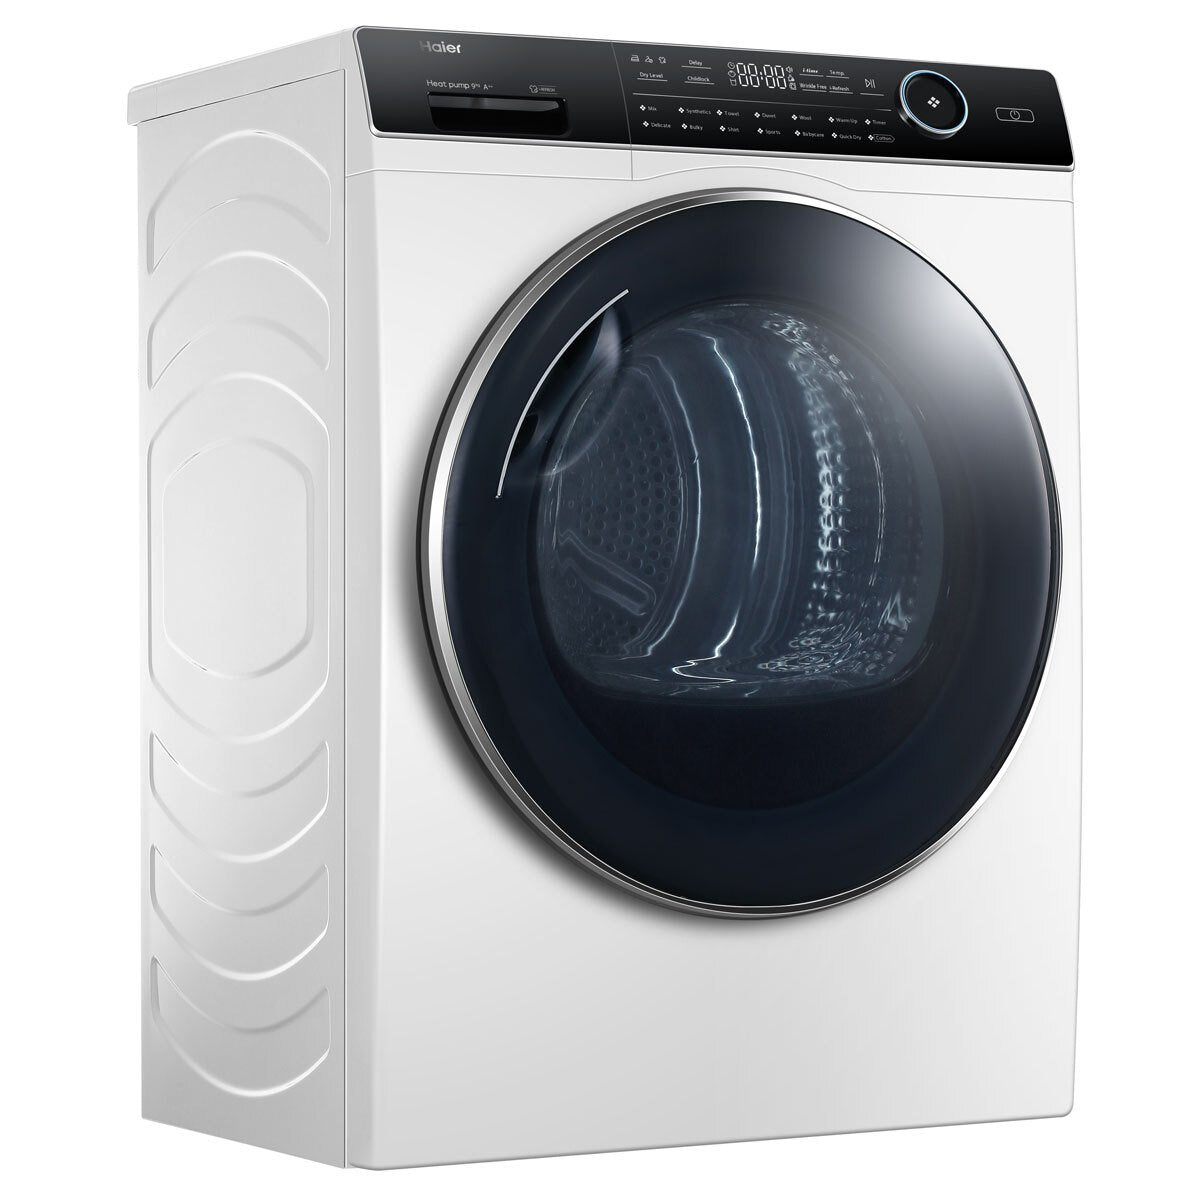 Haier HD90-A2979, 9kg Heat Pump Tumble Dryer, A++ Rated in White